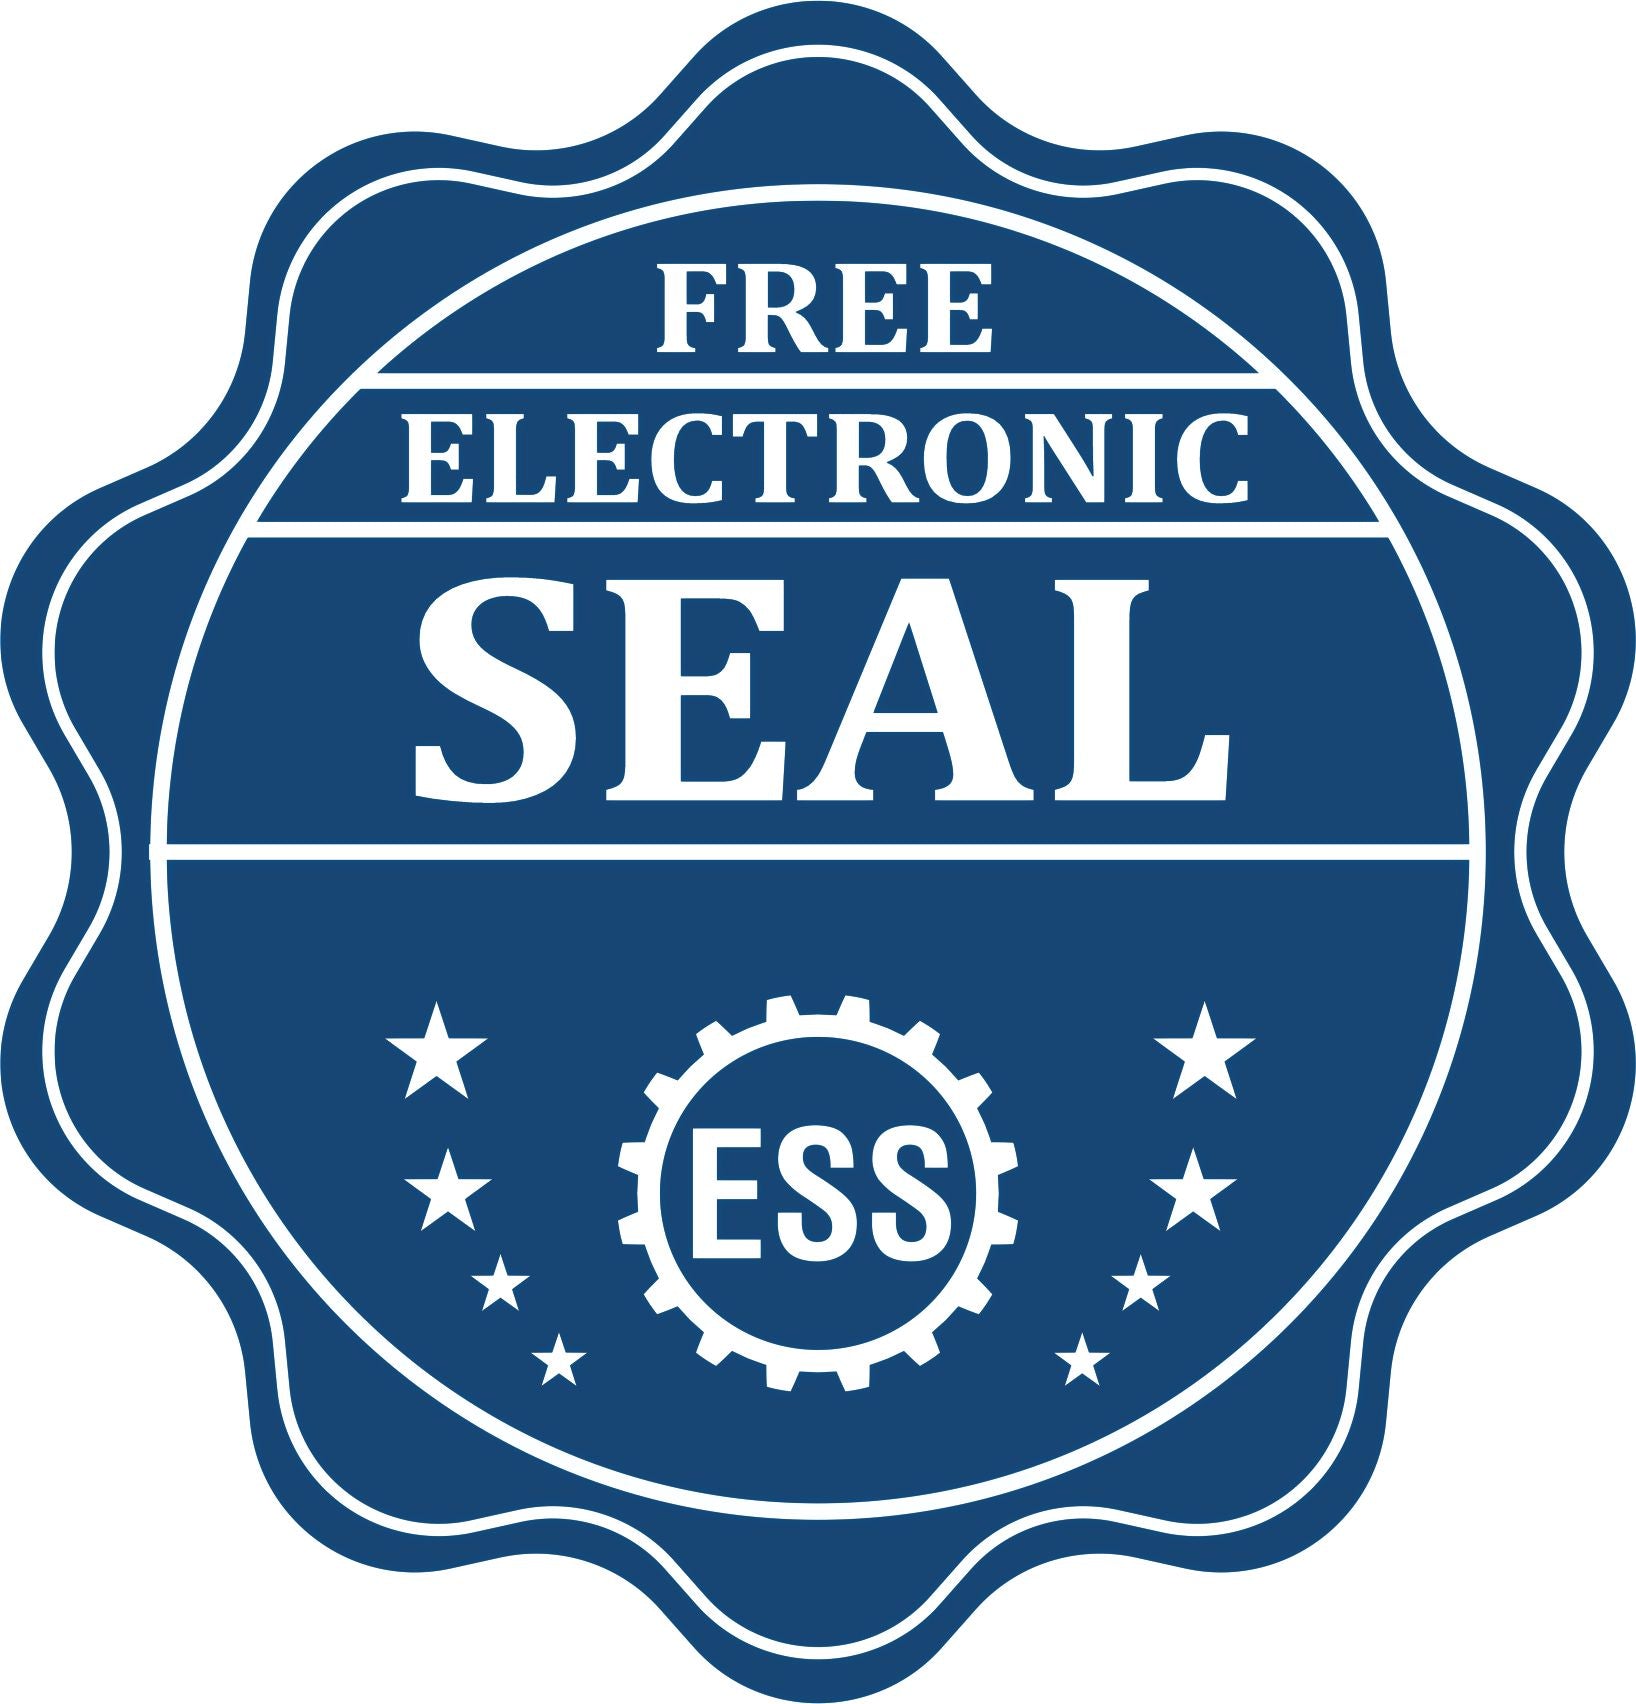 A badge showing a free electronic seal for the State of Puerto Rico Extended Long Reach Engineer Seal with stars and the ESS gear on the emblem.